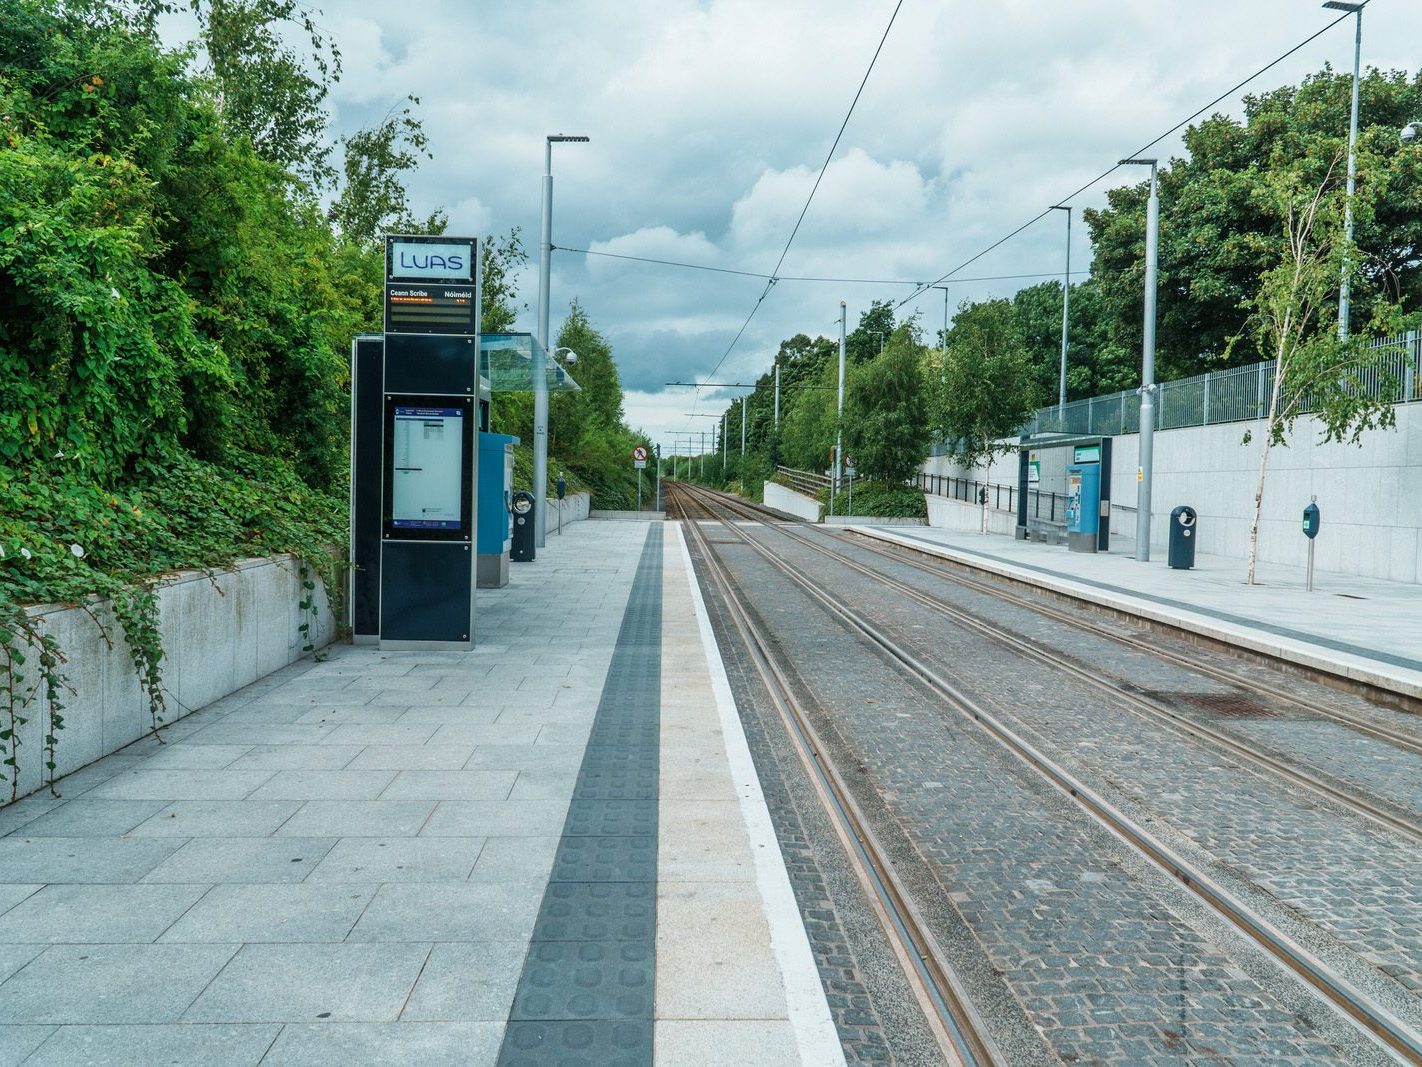 CABRA LUAS TRAM STOP ON CONNAUGHT STREET [GOOGLE BARD INCORRECTLY CLAIMED THAT THERE IS A PUBLIC TOILET AND A TICKET OFFICE] 003